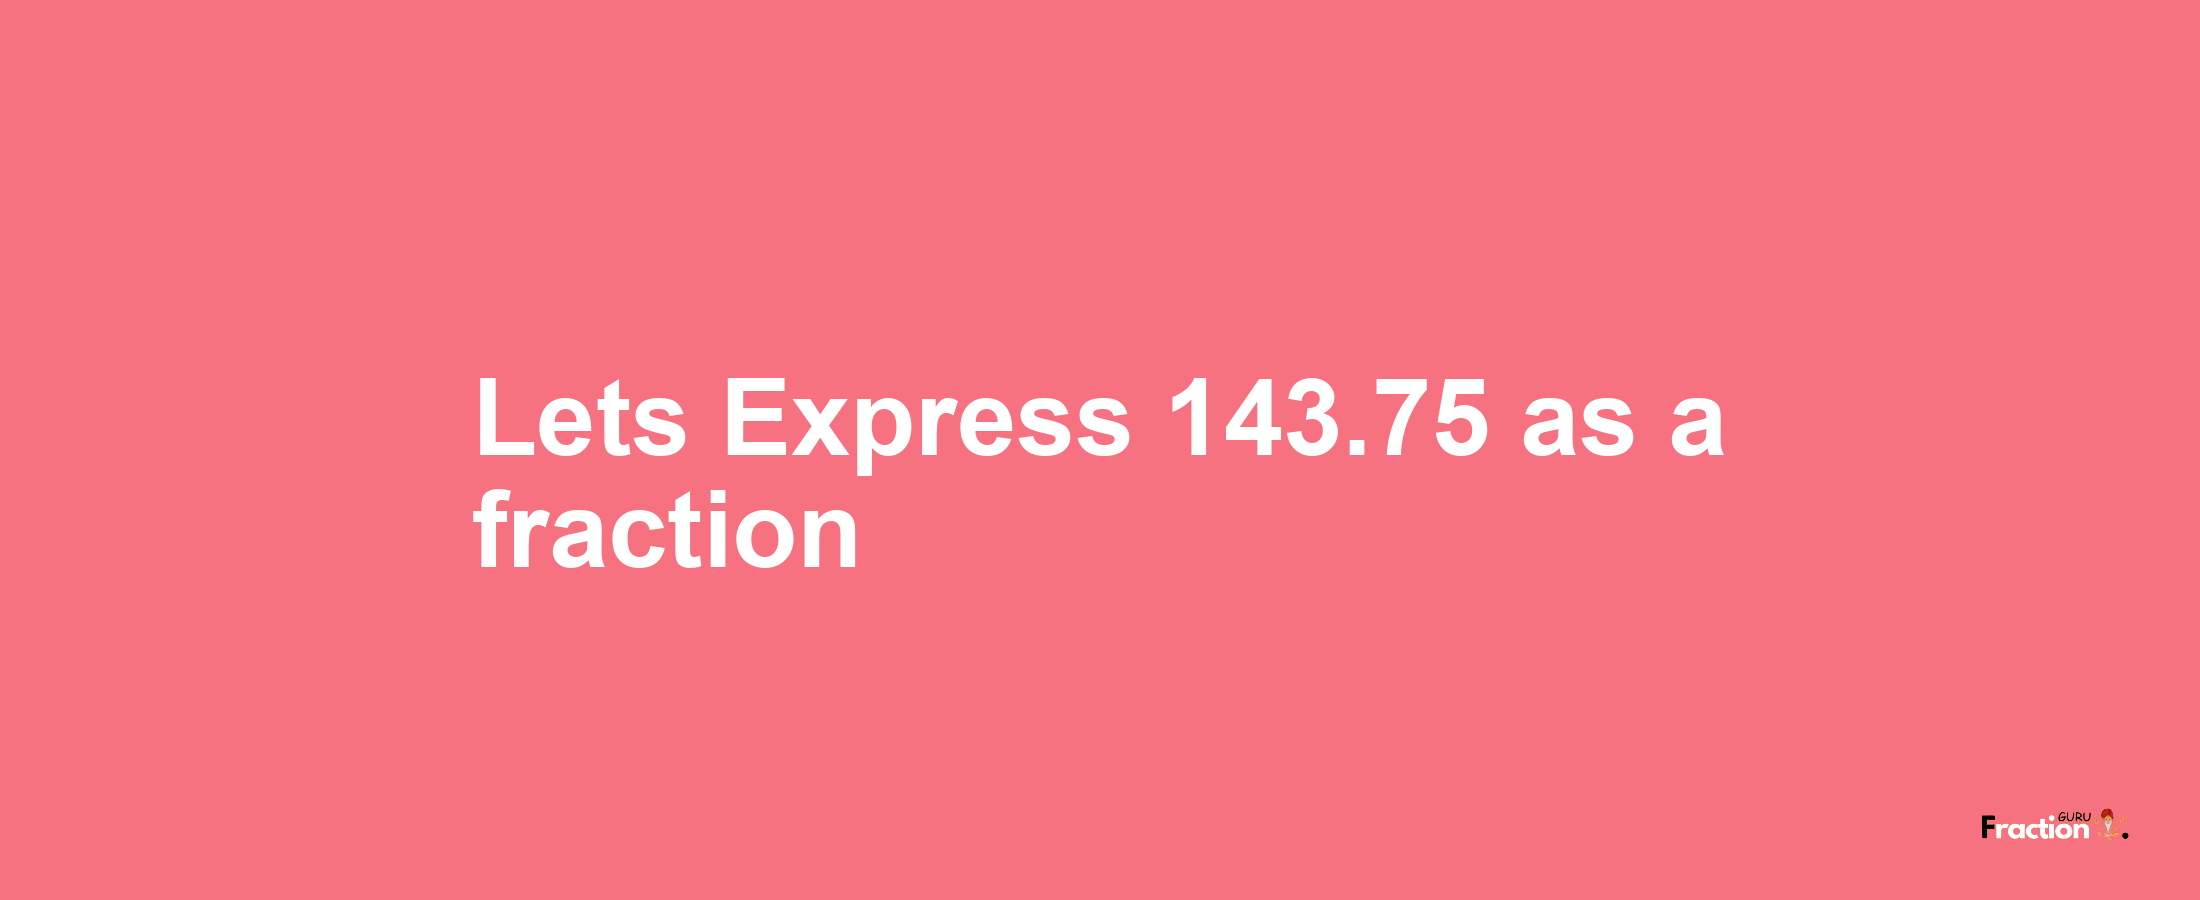 Lets Express 143.75 as afraction